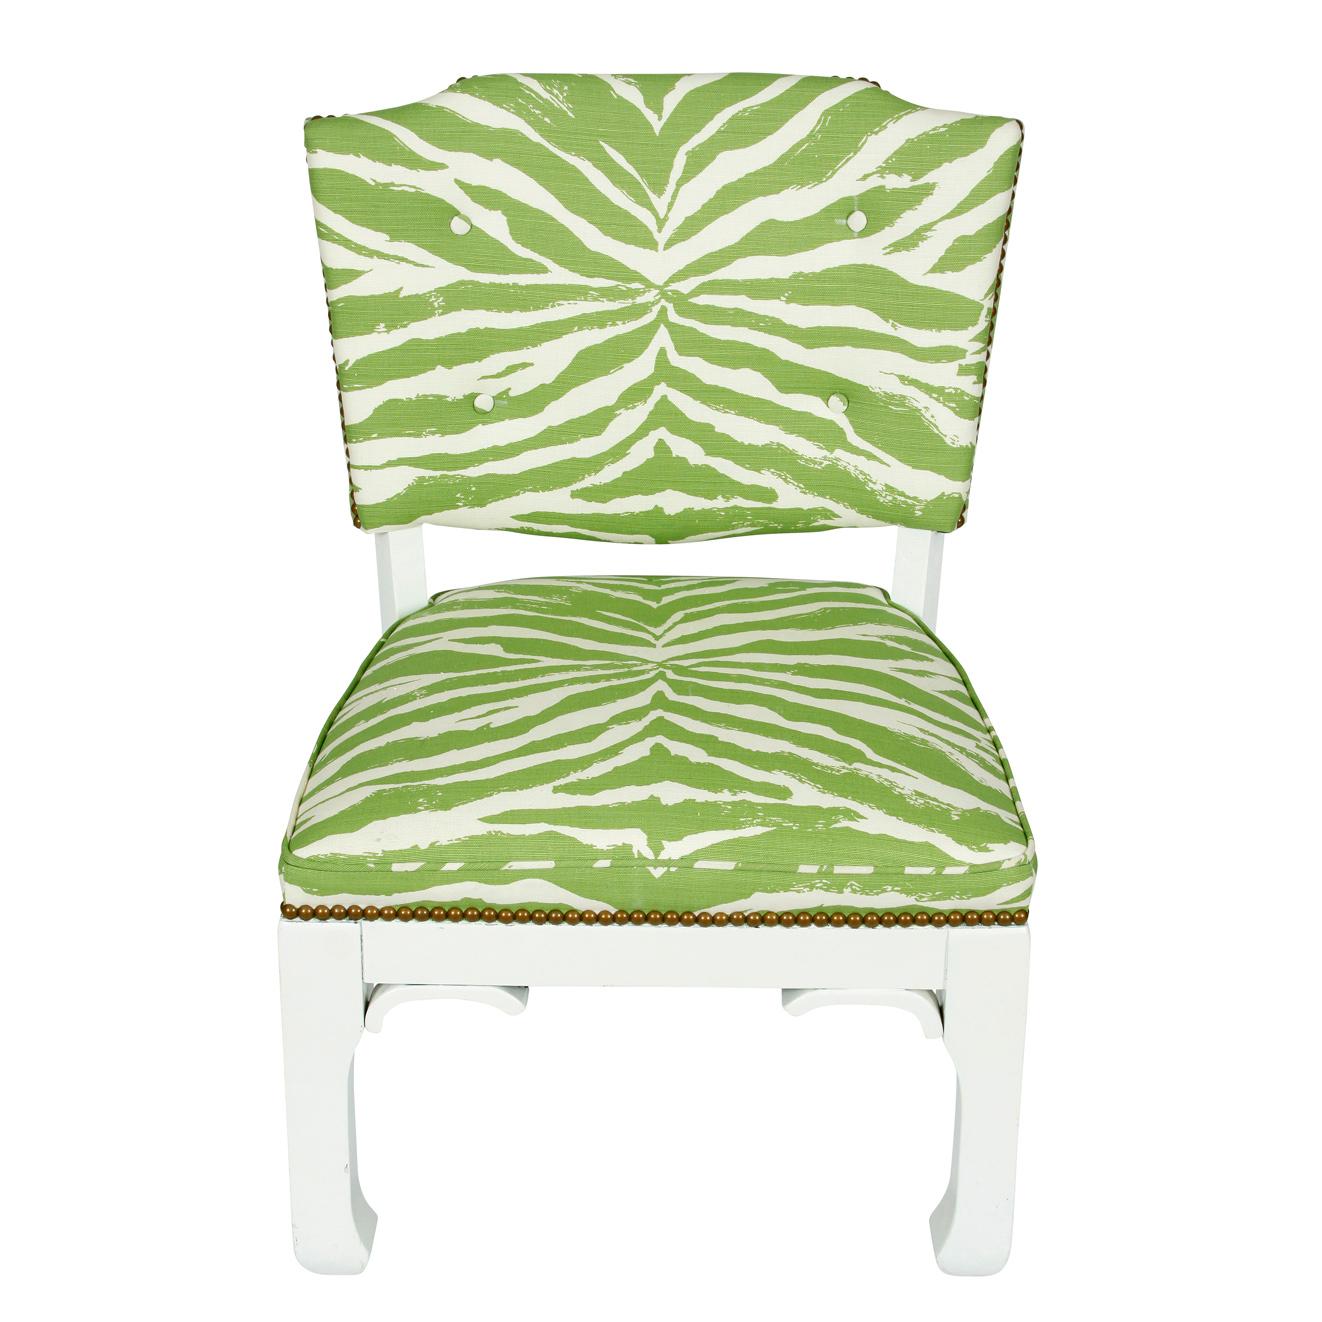 20th Century Pair of James Mont Chairs in Green and White Zebra Fabric